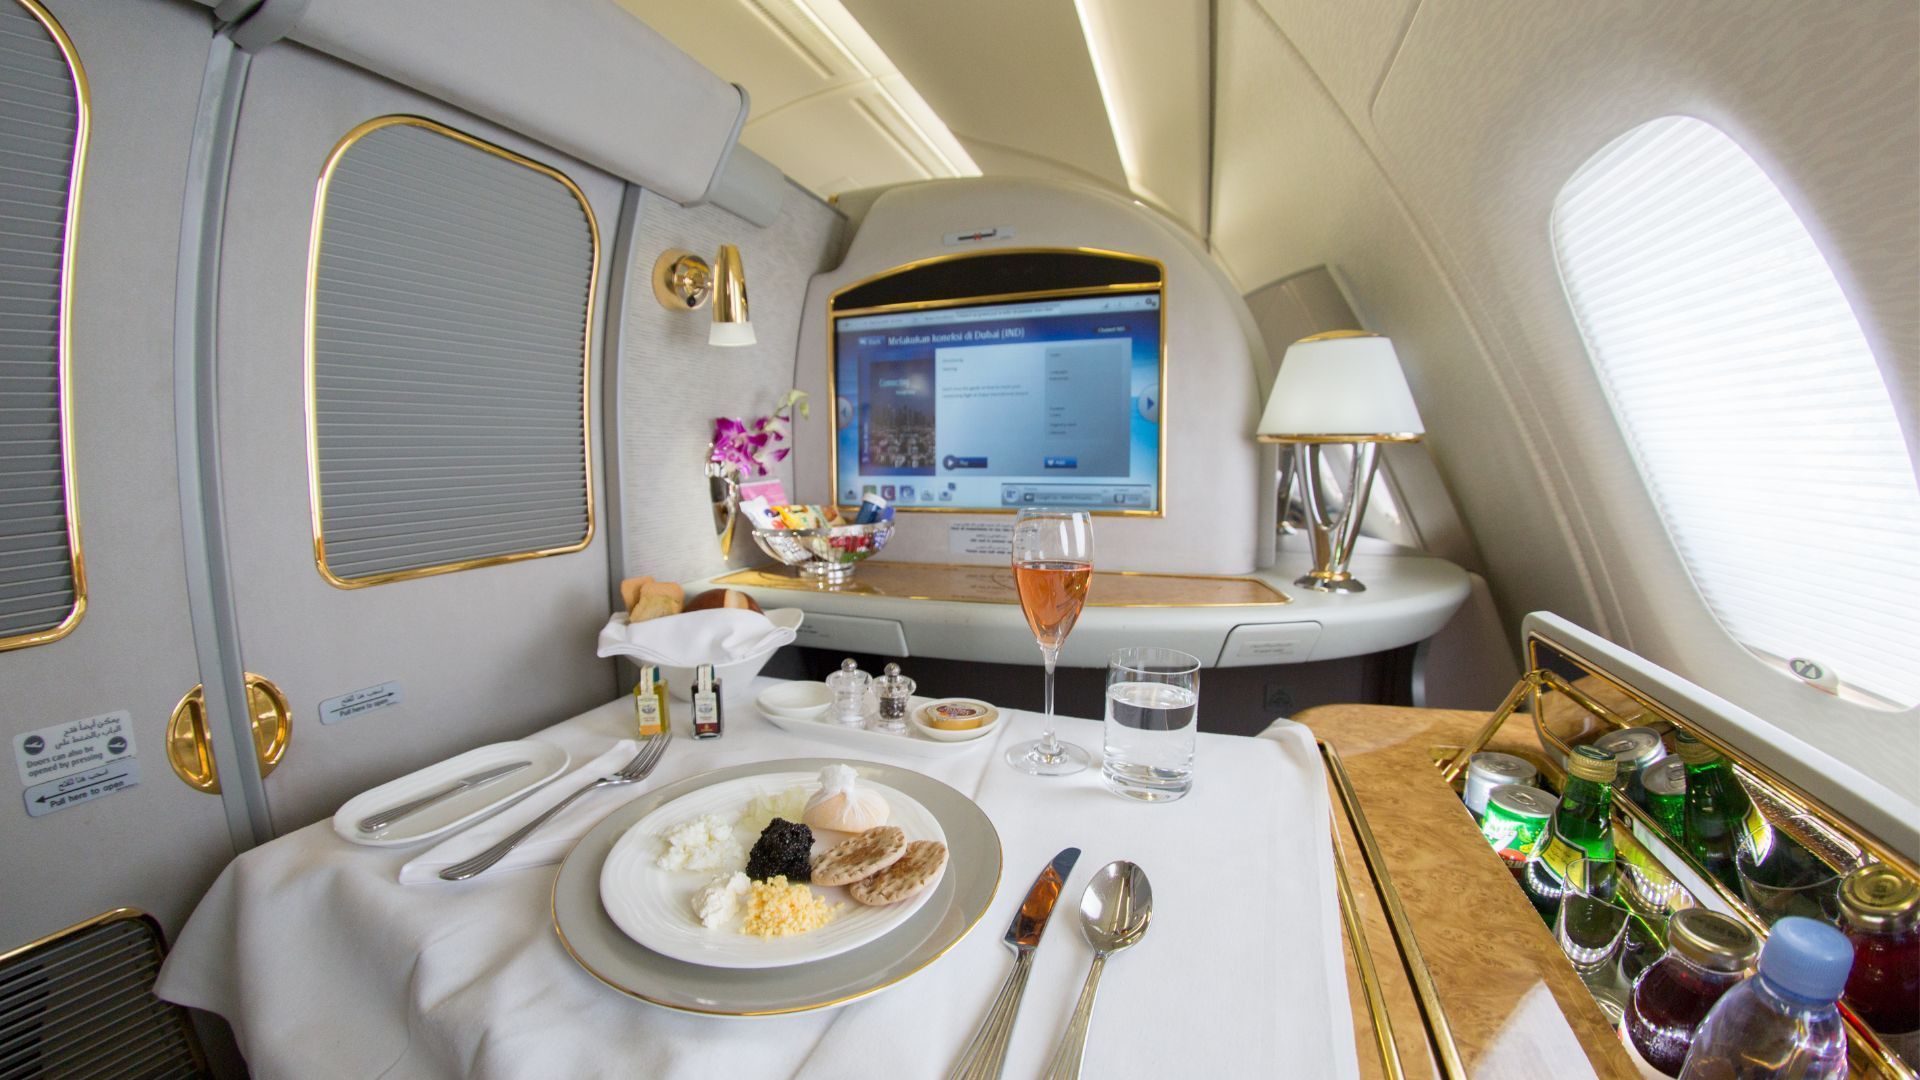 First class cabins: Airlines taking luxury to new levels